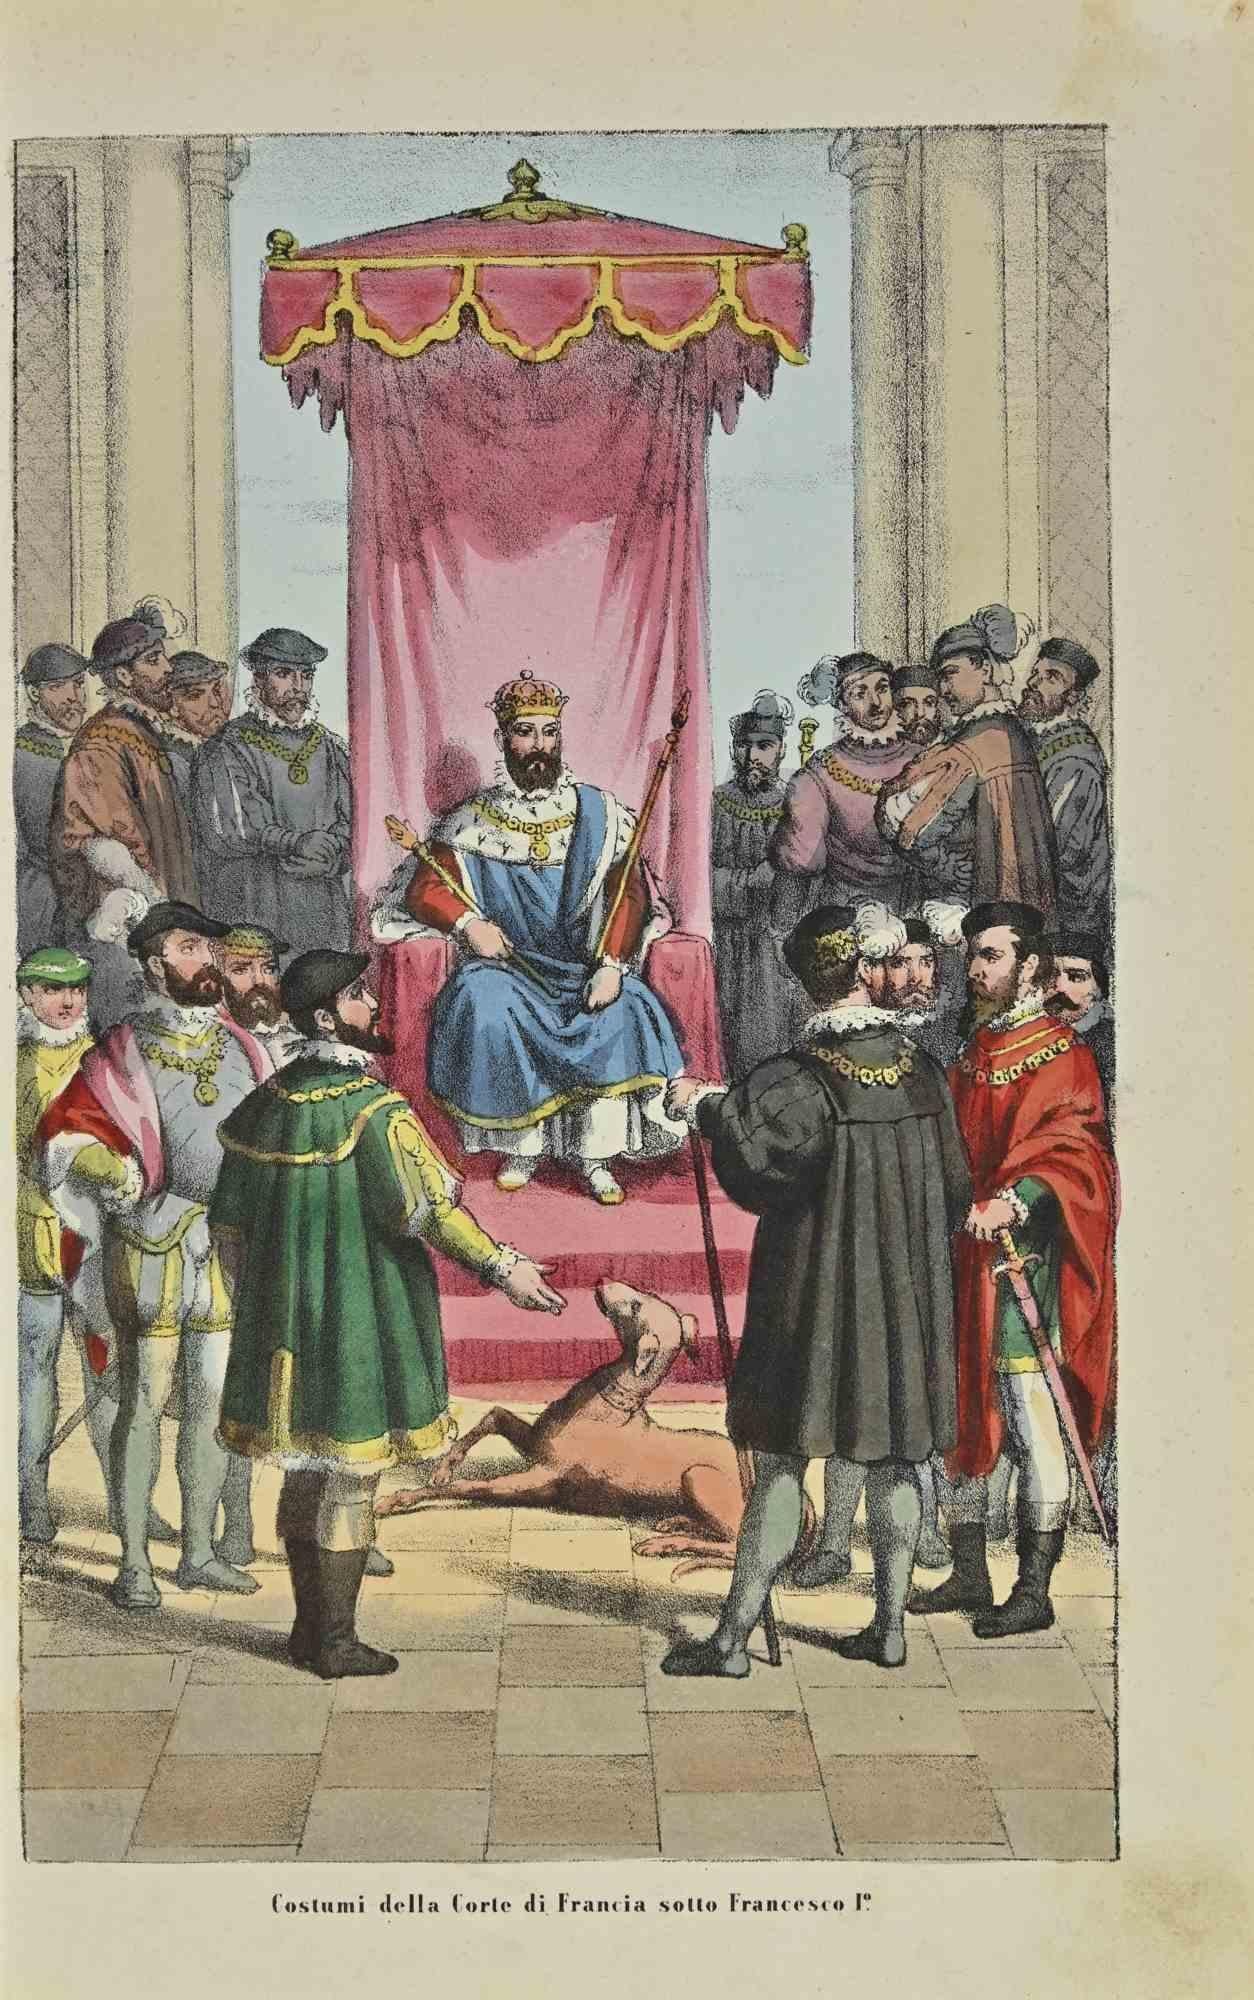 Costumes of the Court of France under Francis I is a lithograph made by Auguste Wahlen in 1844.

Hand colored.

Good condition.

At the center of the artwork is the original title "Costumi della Corte di Francia sotto Francesco I".

The work is part